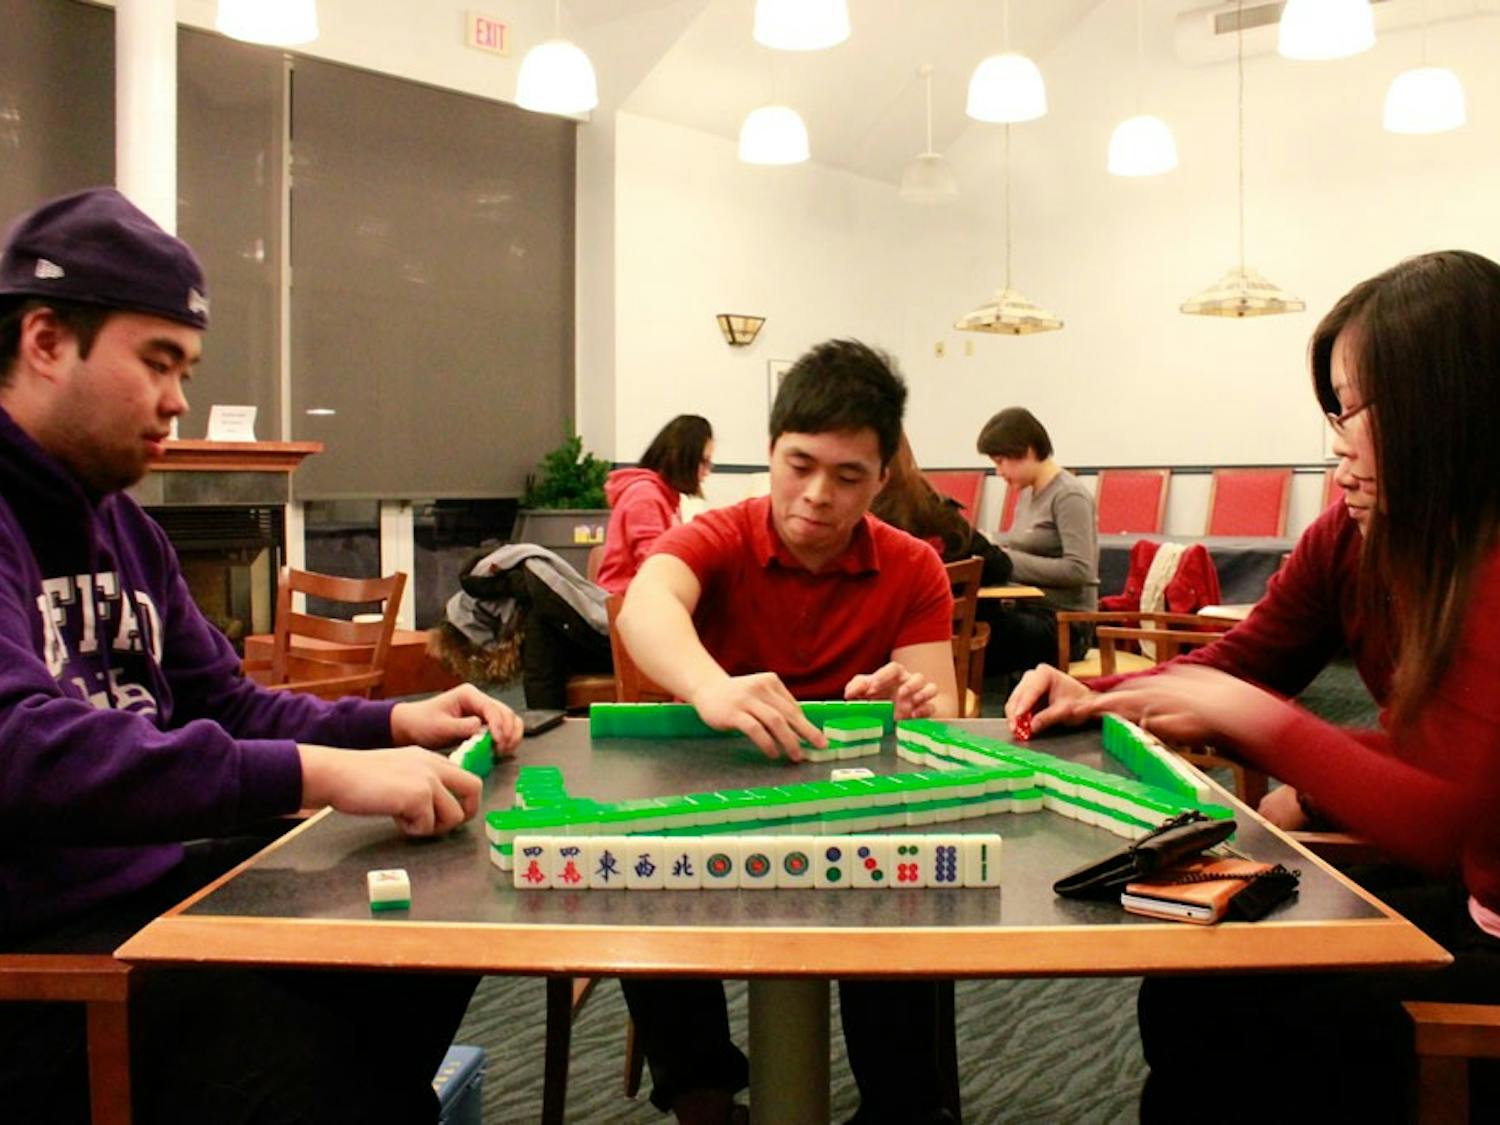 Playing Mahjong is one of the must-do activities during the Chinese New Year in Hong Kong. Hong Kong people believe gambling can bring good luck.